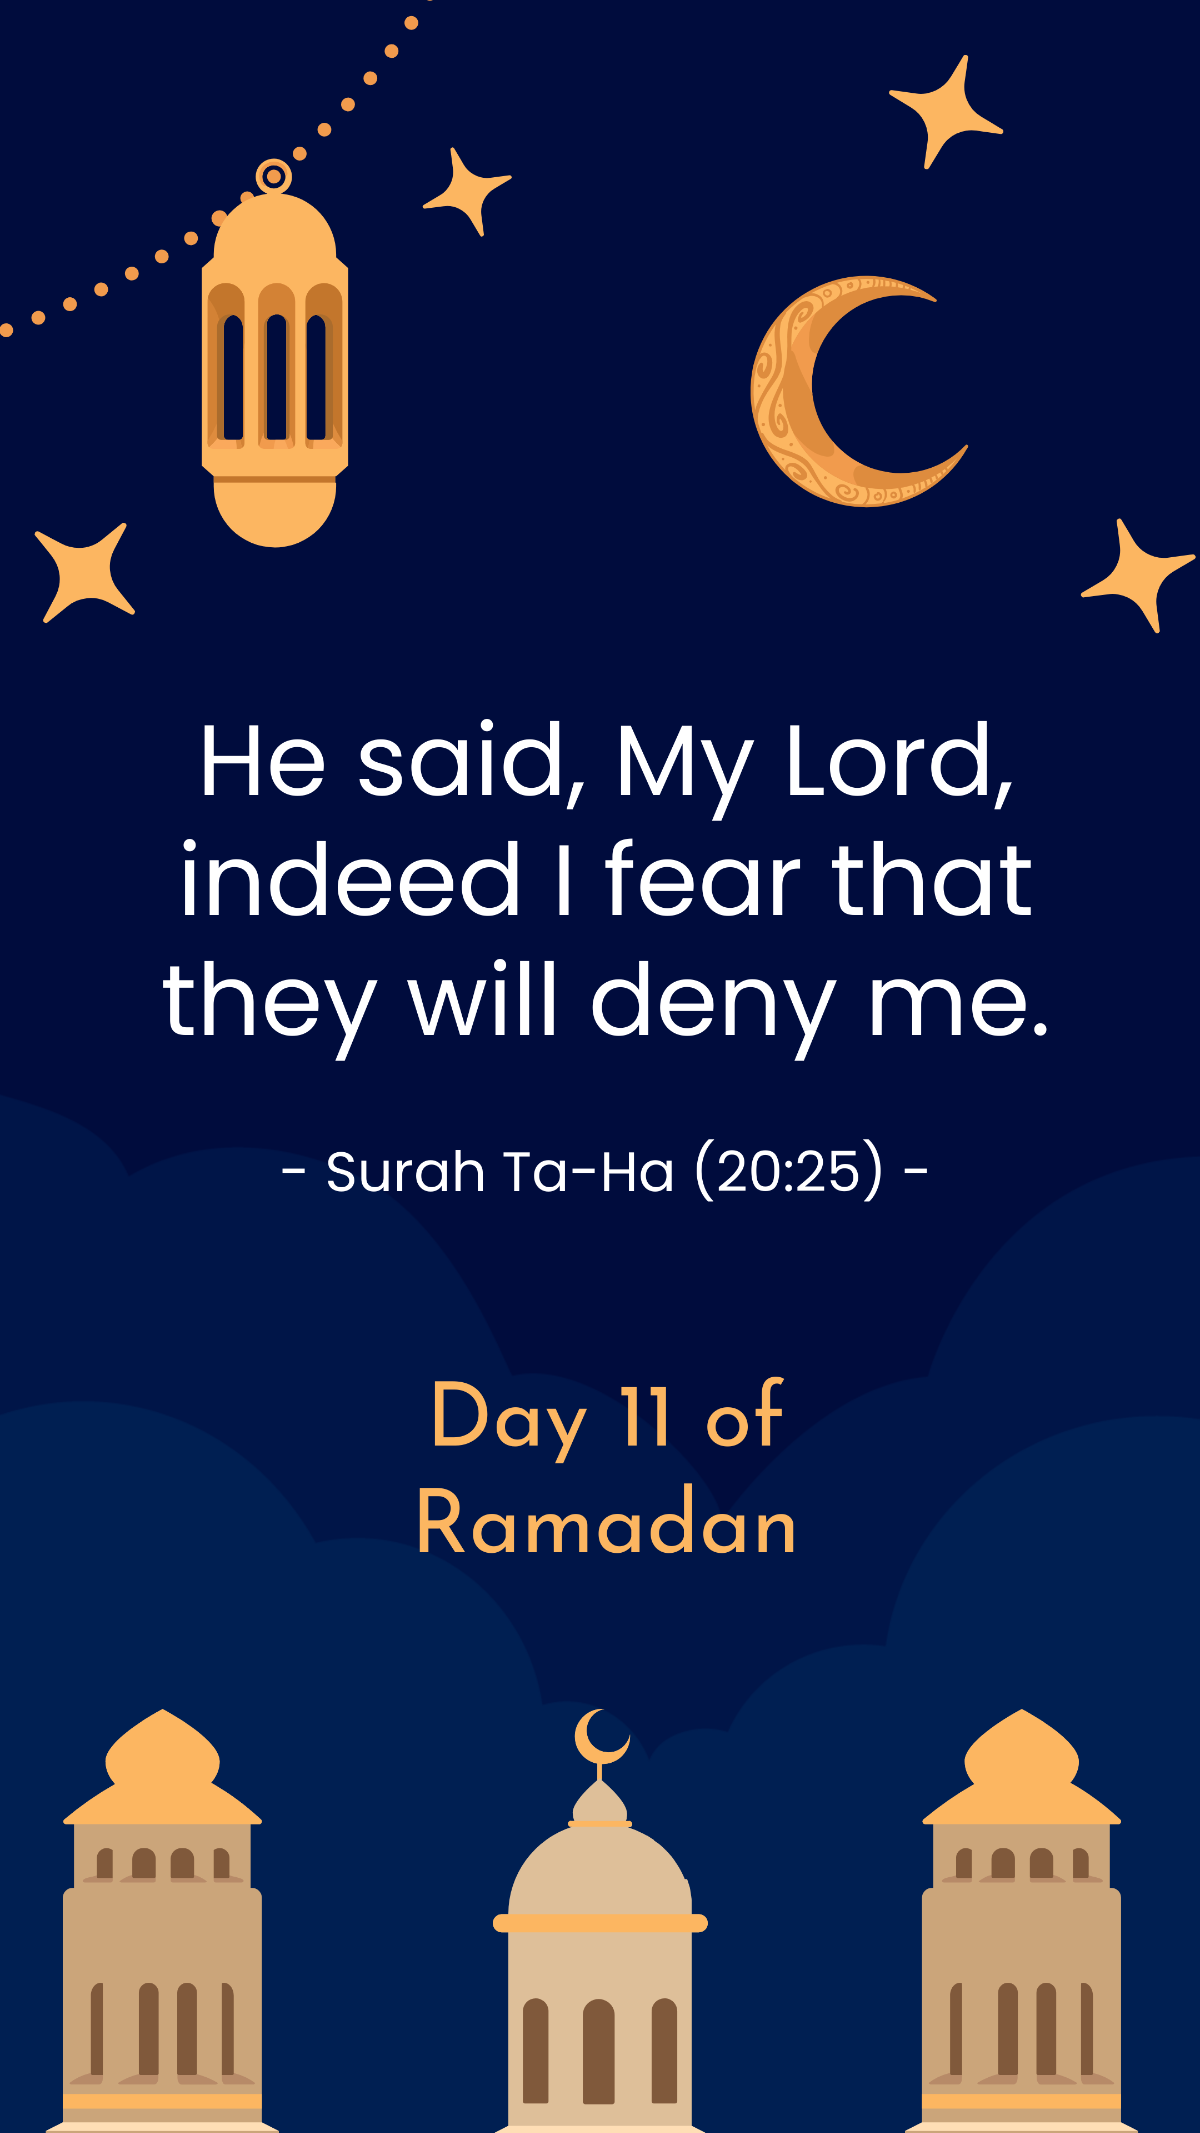 Ramadan Day 11 Quote Template